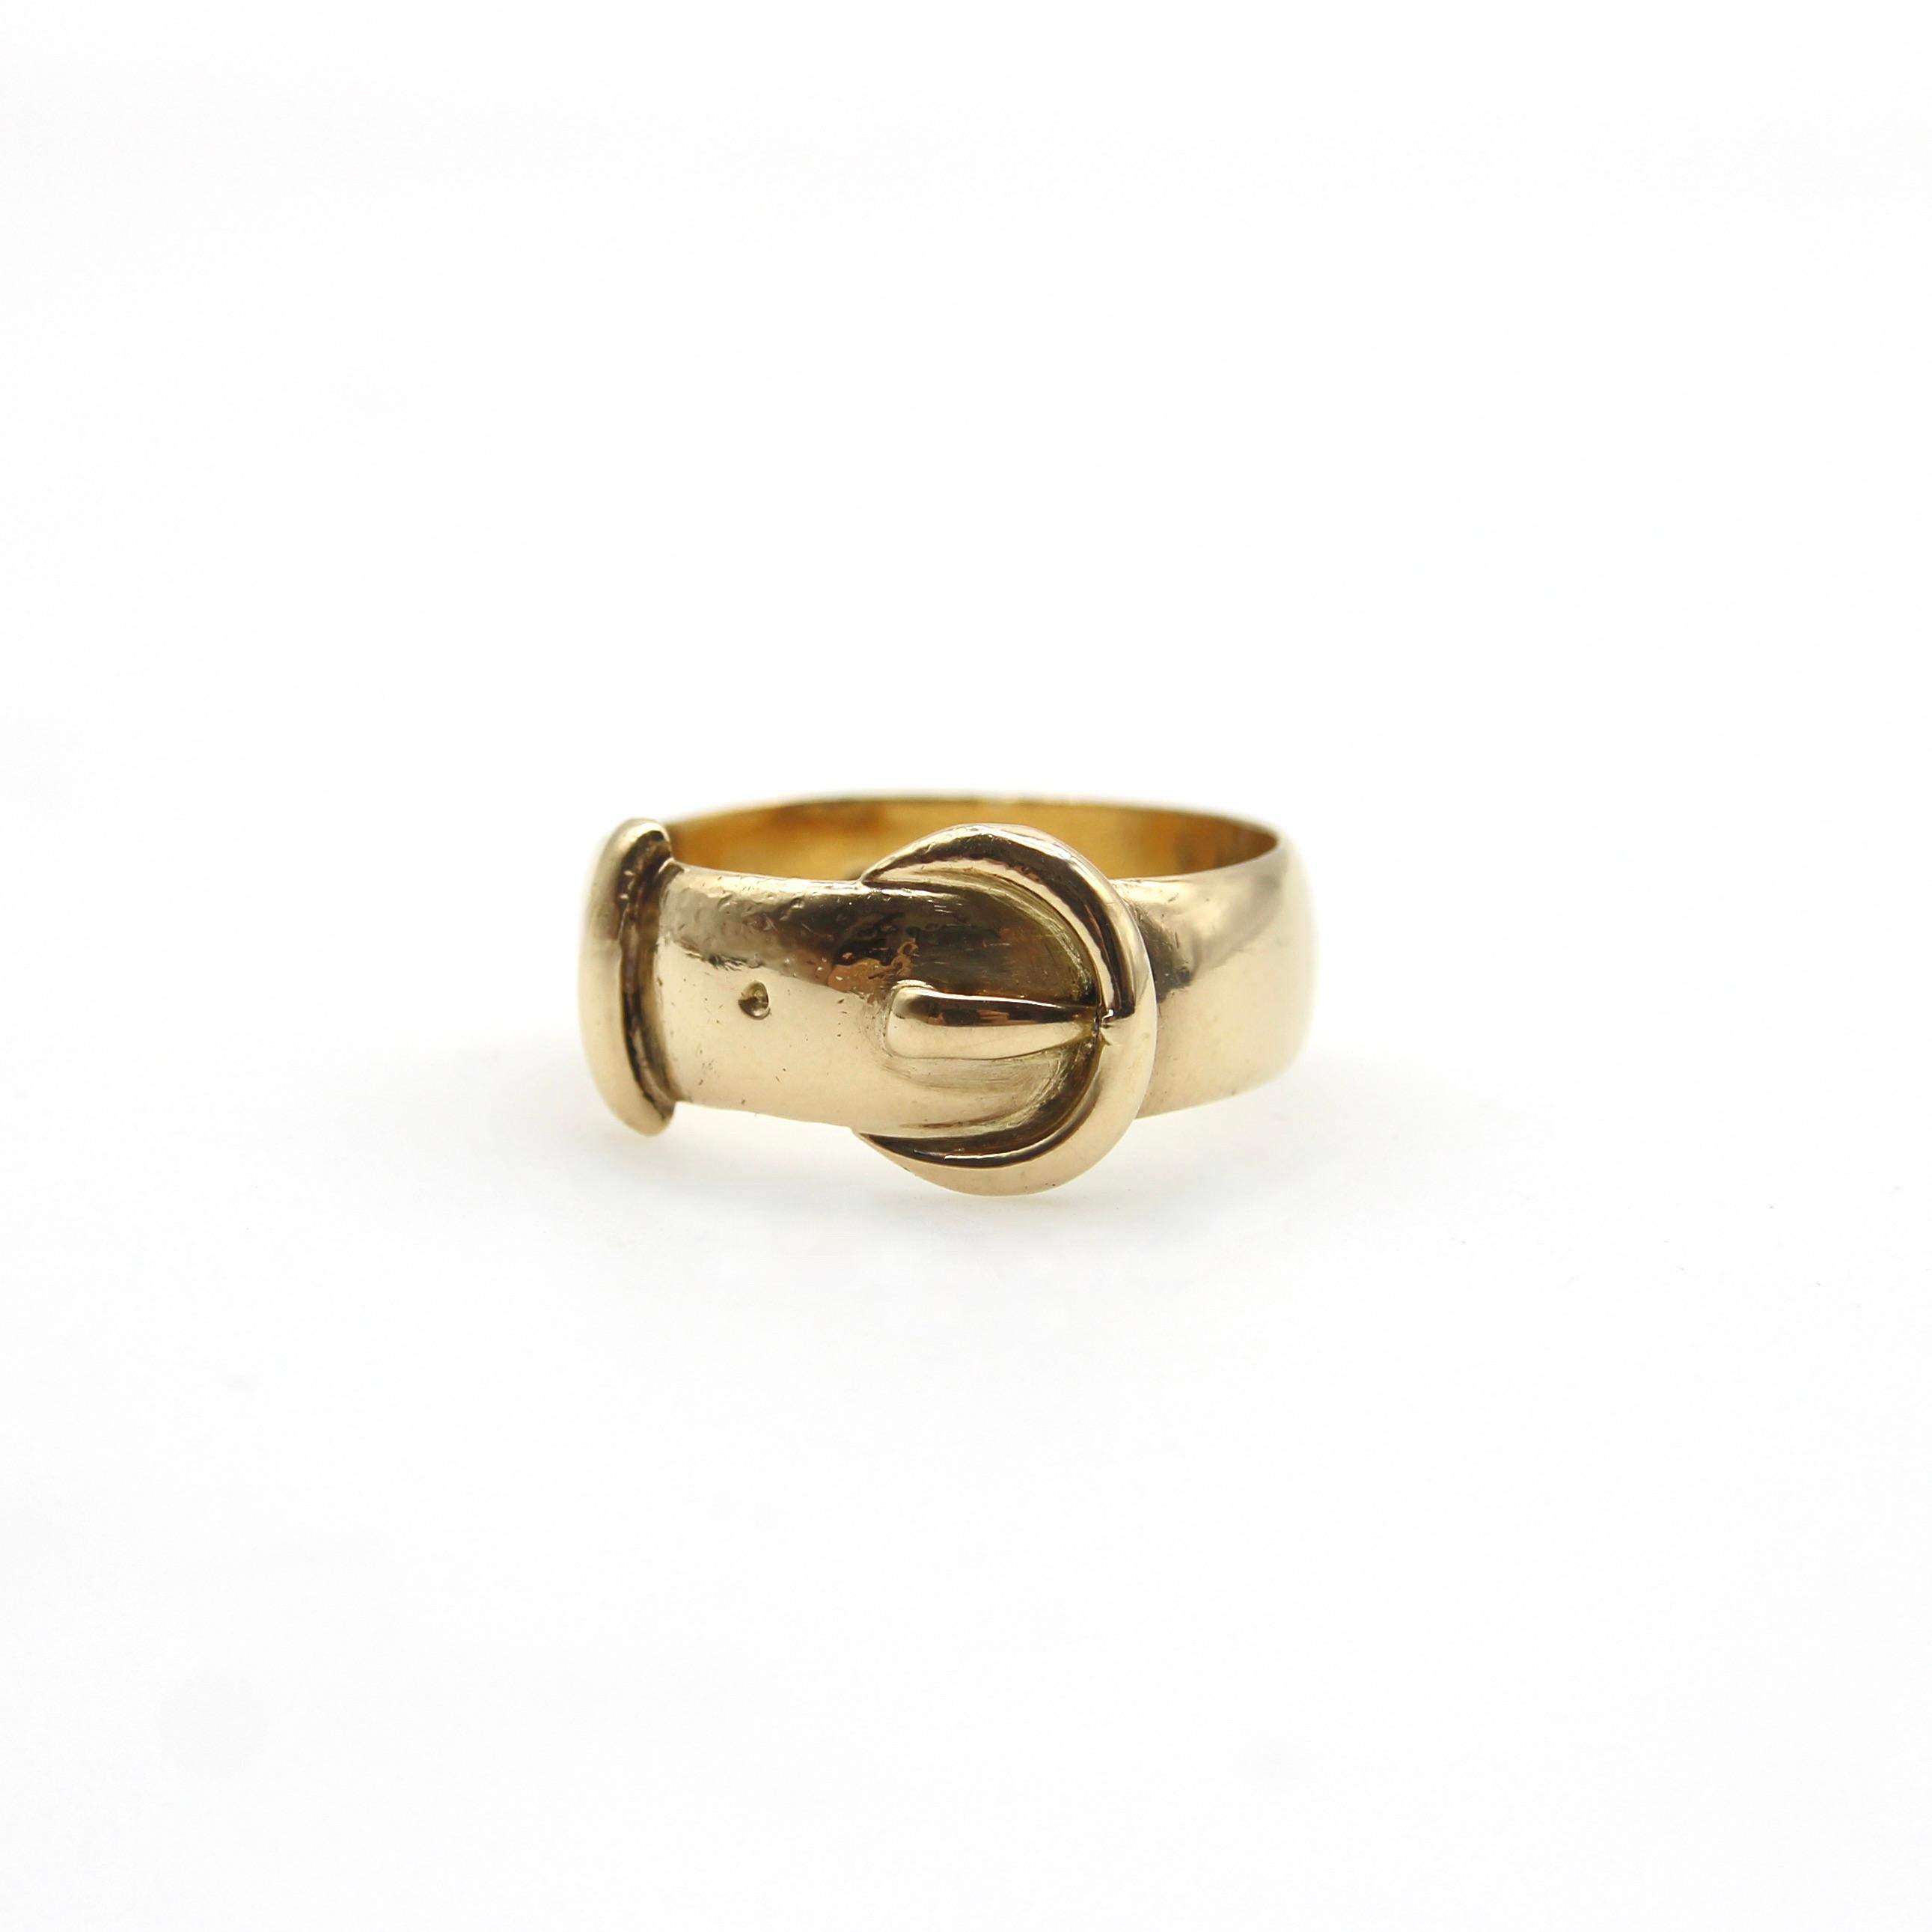 Made in England in 1919, this 18k gold buckle ring is an Edwardian take on the Victorian symbol for everlasting love. The ring has a curvilinear nature, with a rounded crescent moon shaped buckle and curved strap. The wide band and subtle design